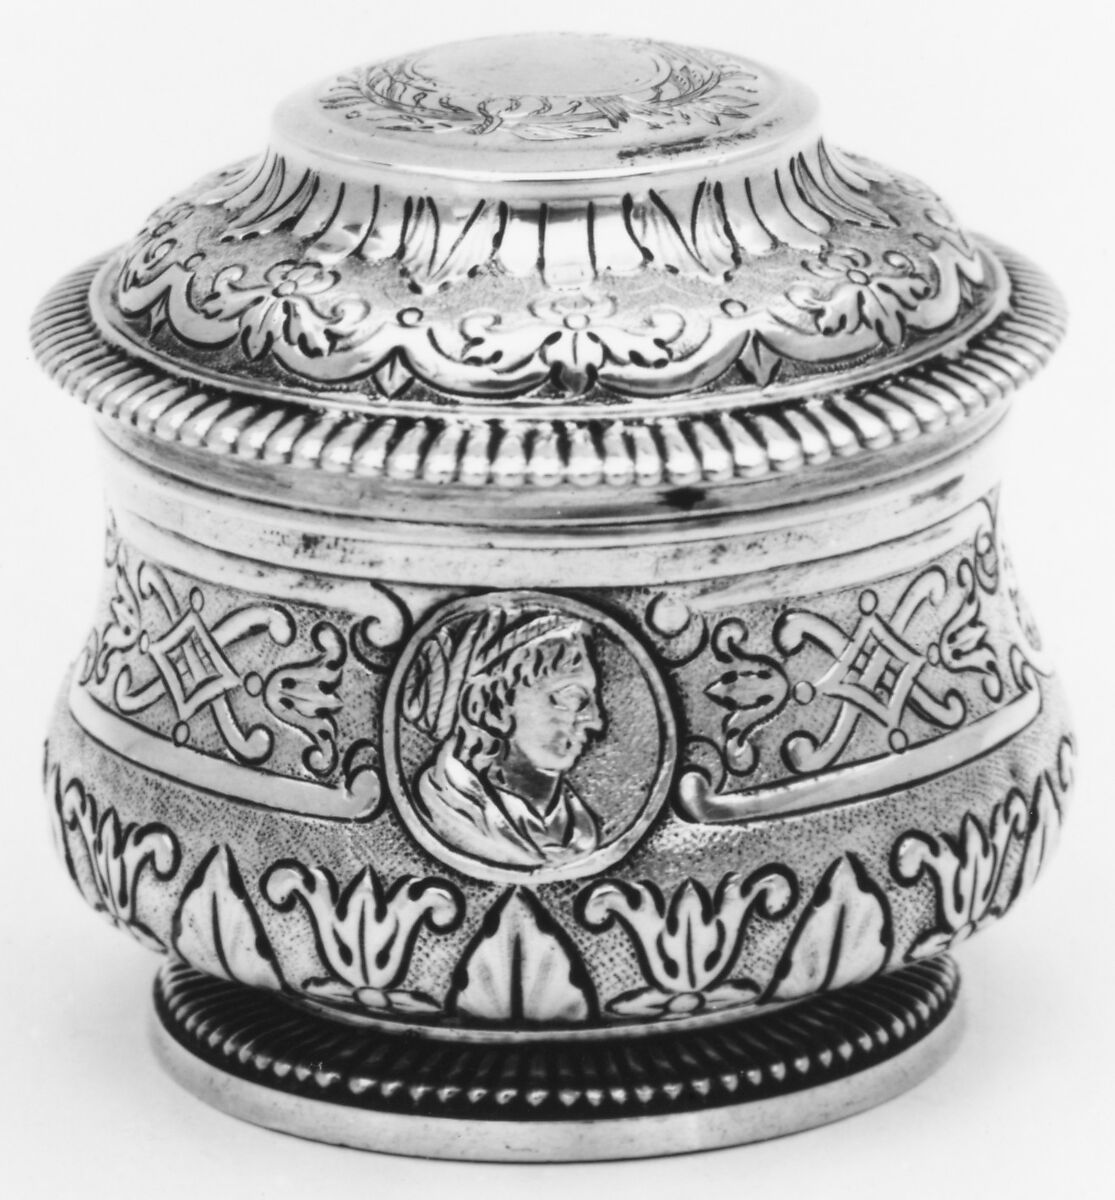 Box (one of a pair) (part of a toilet service), Jean-Baptiste Boullemer (1682–1739, master 1705), Silver, French, Rennes 